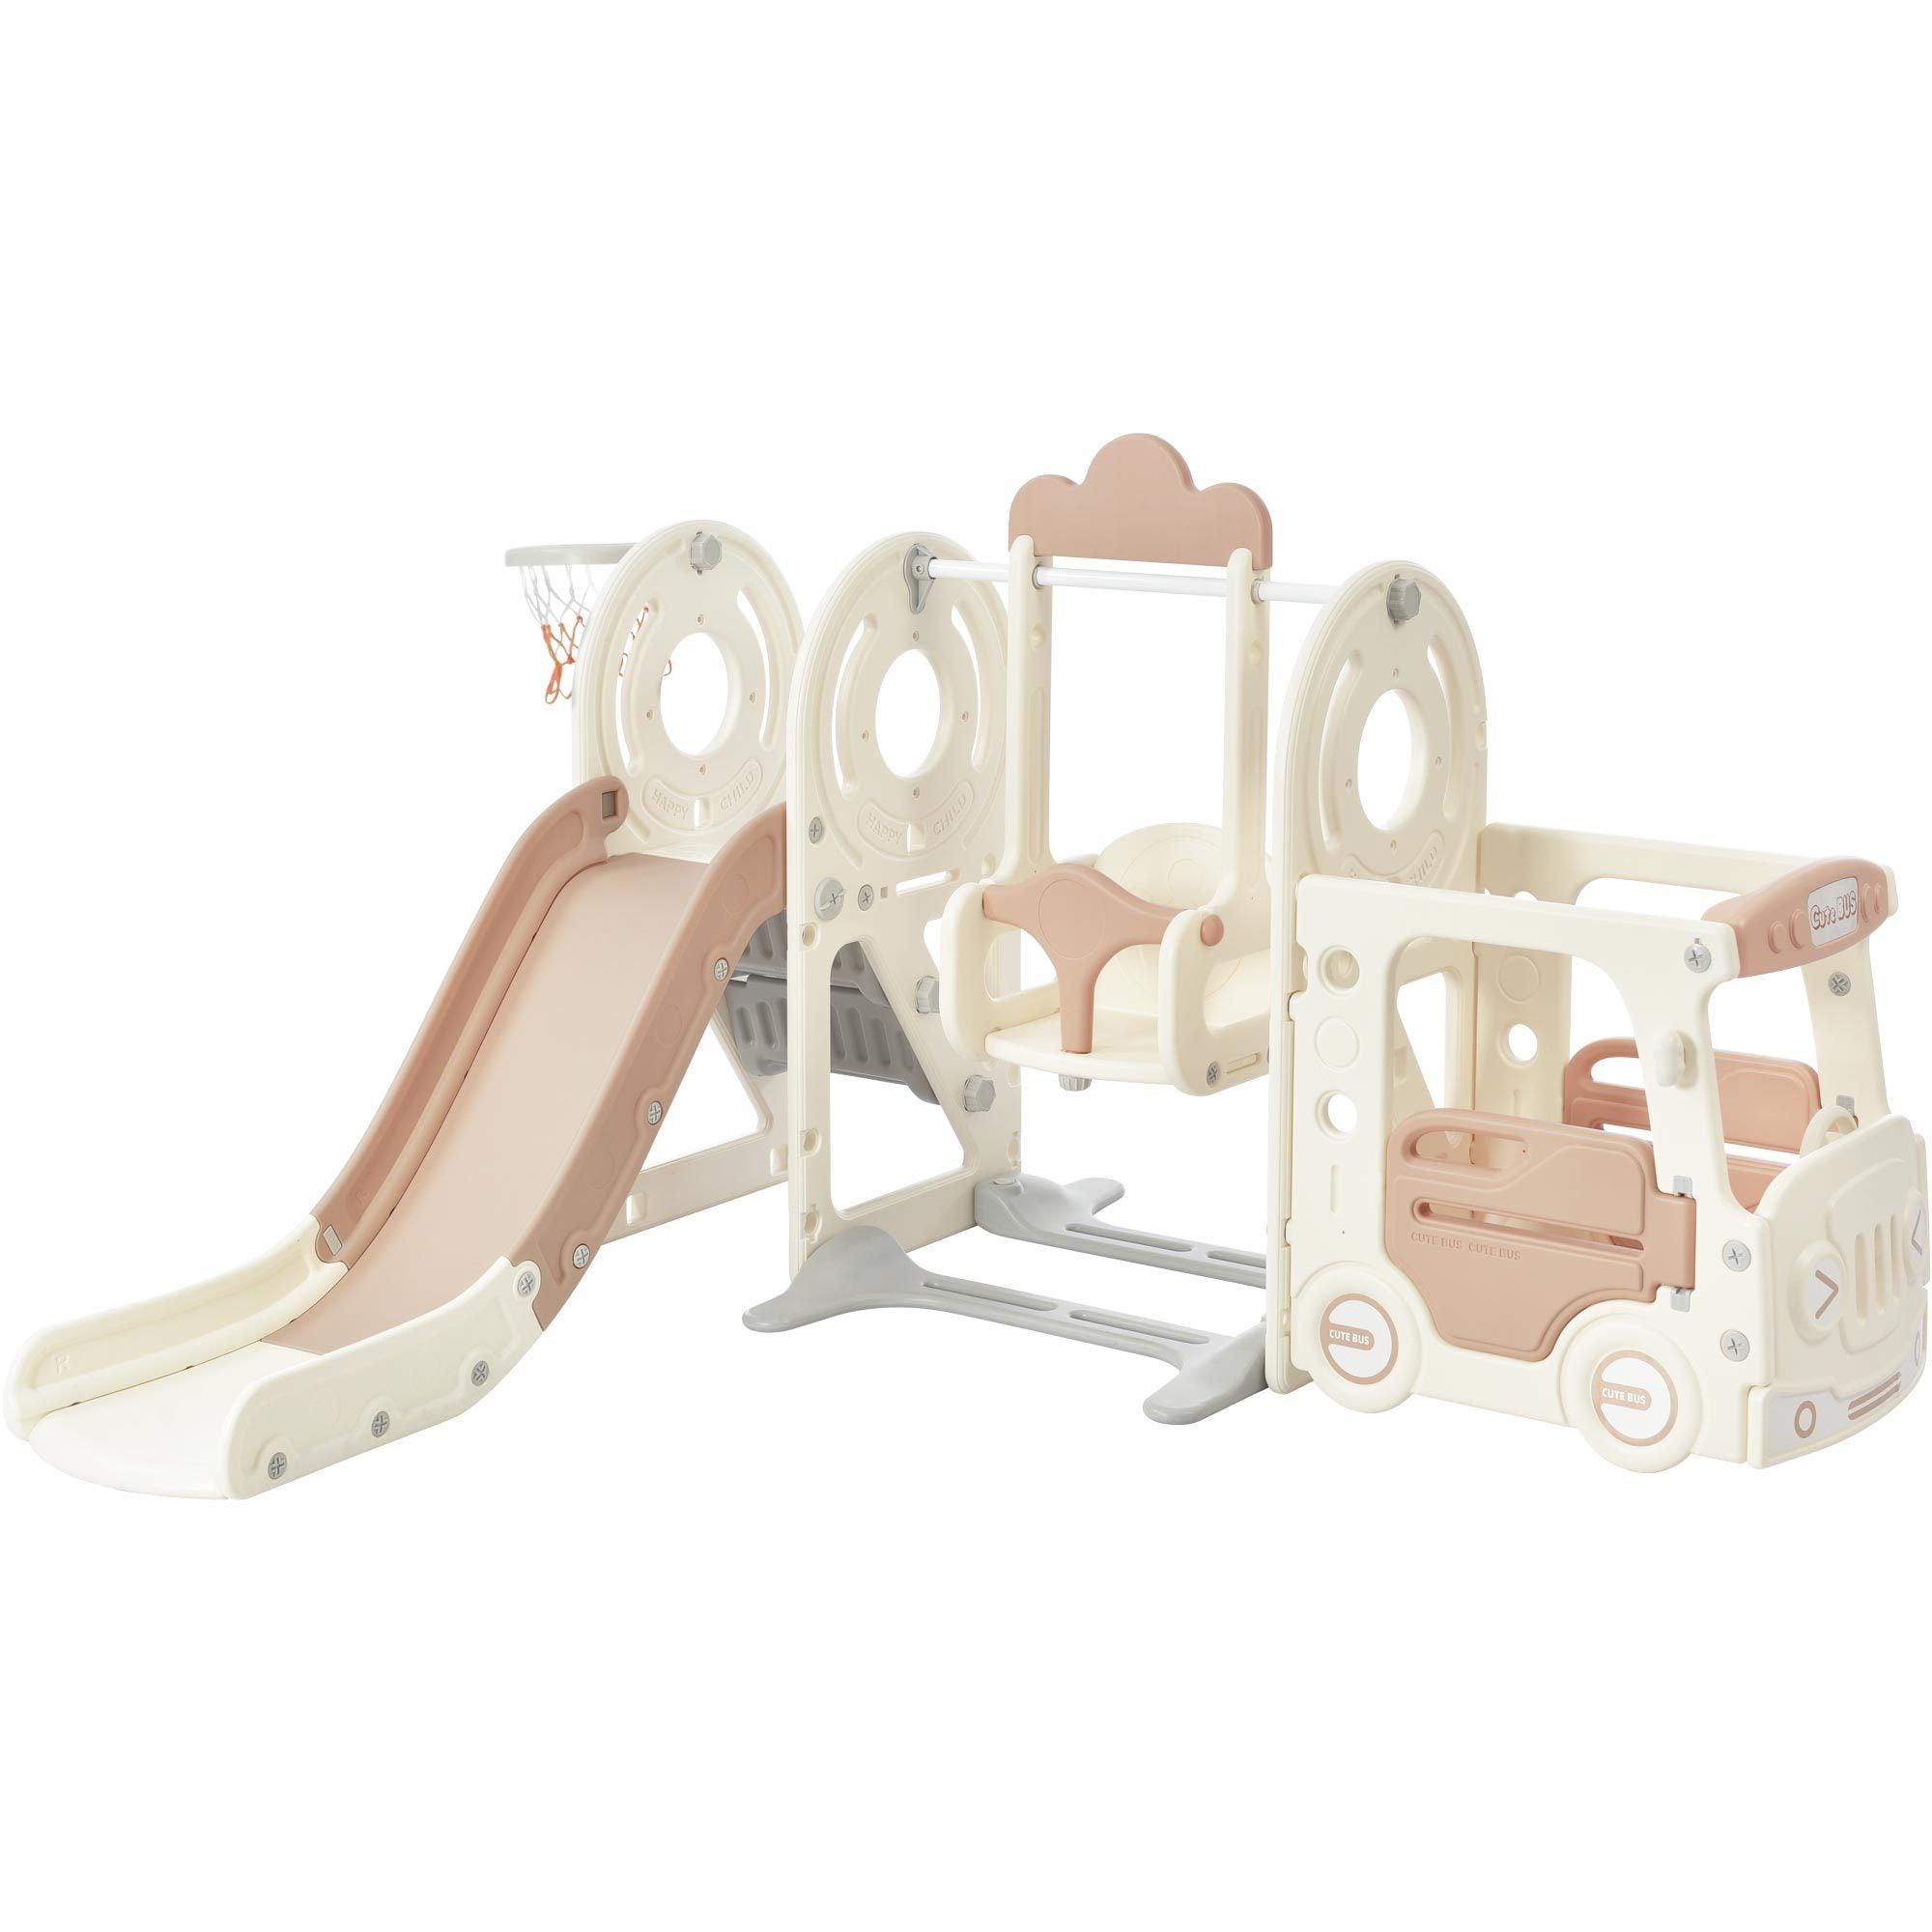 🆓🚛 Kids Swing-N-Slide With Bus Play Structure, Freestanding Bus Toy With Slide&Swing for Toddlers, Bus Slide Set With Basketball Hoop, White & Beige